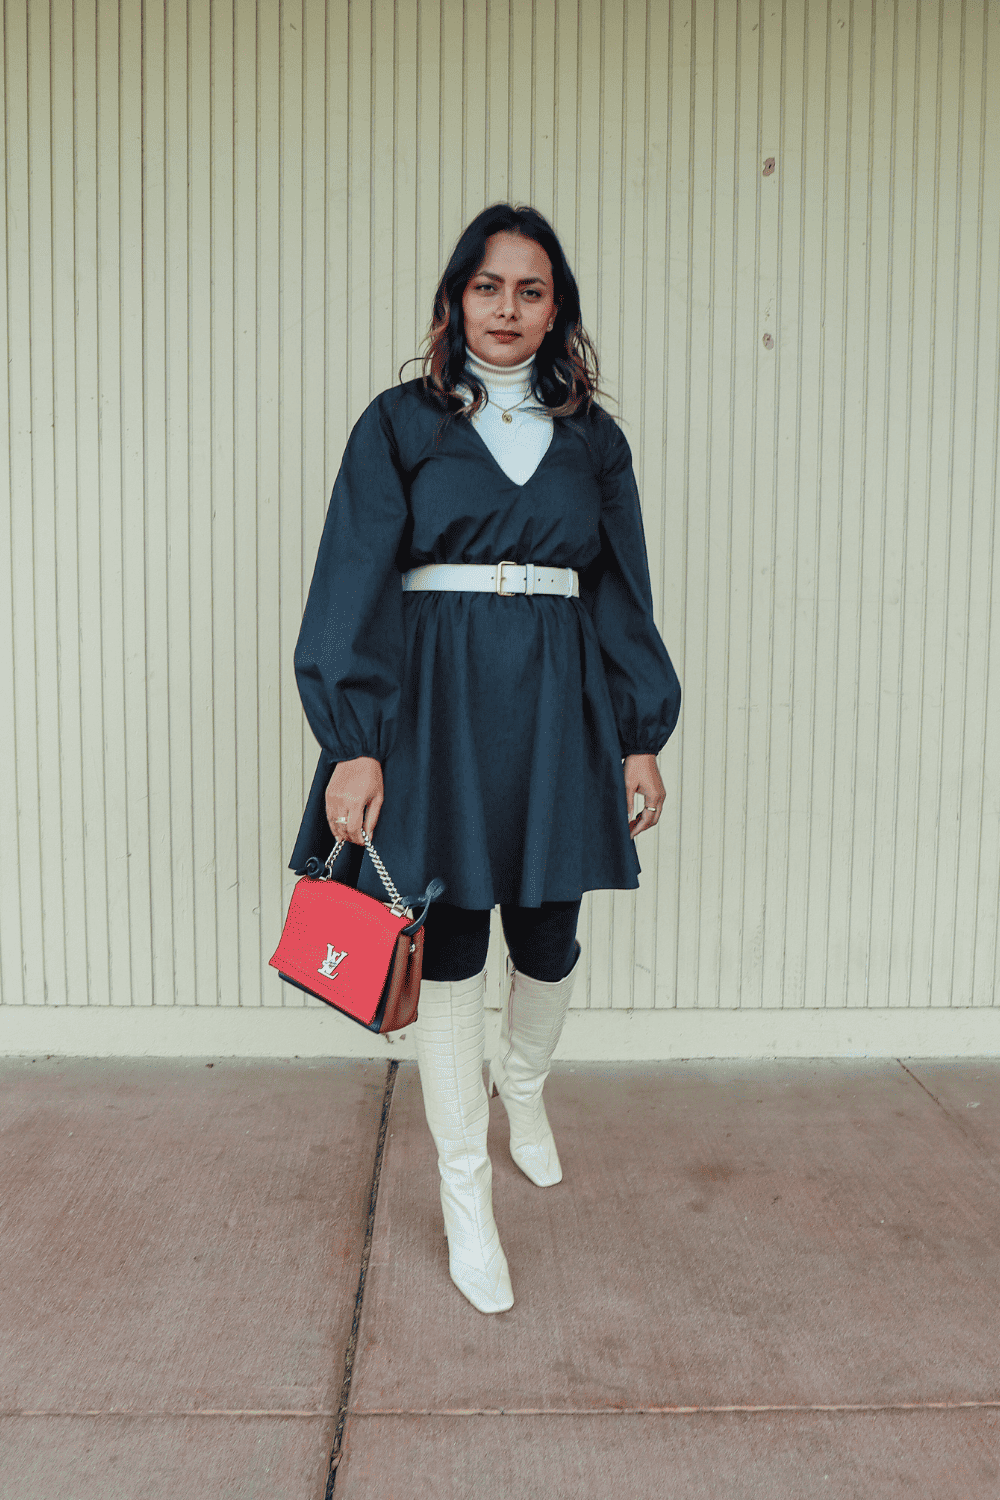 How to wear a dress in winter without looking frumpy